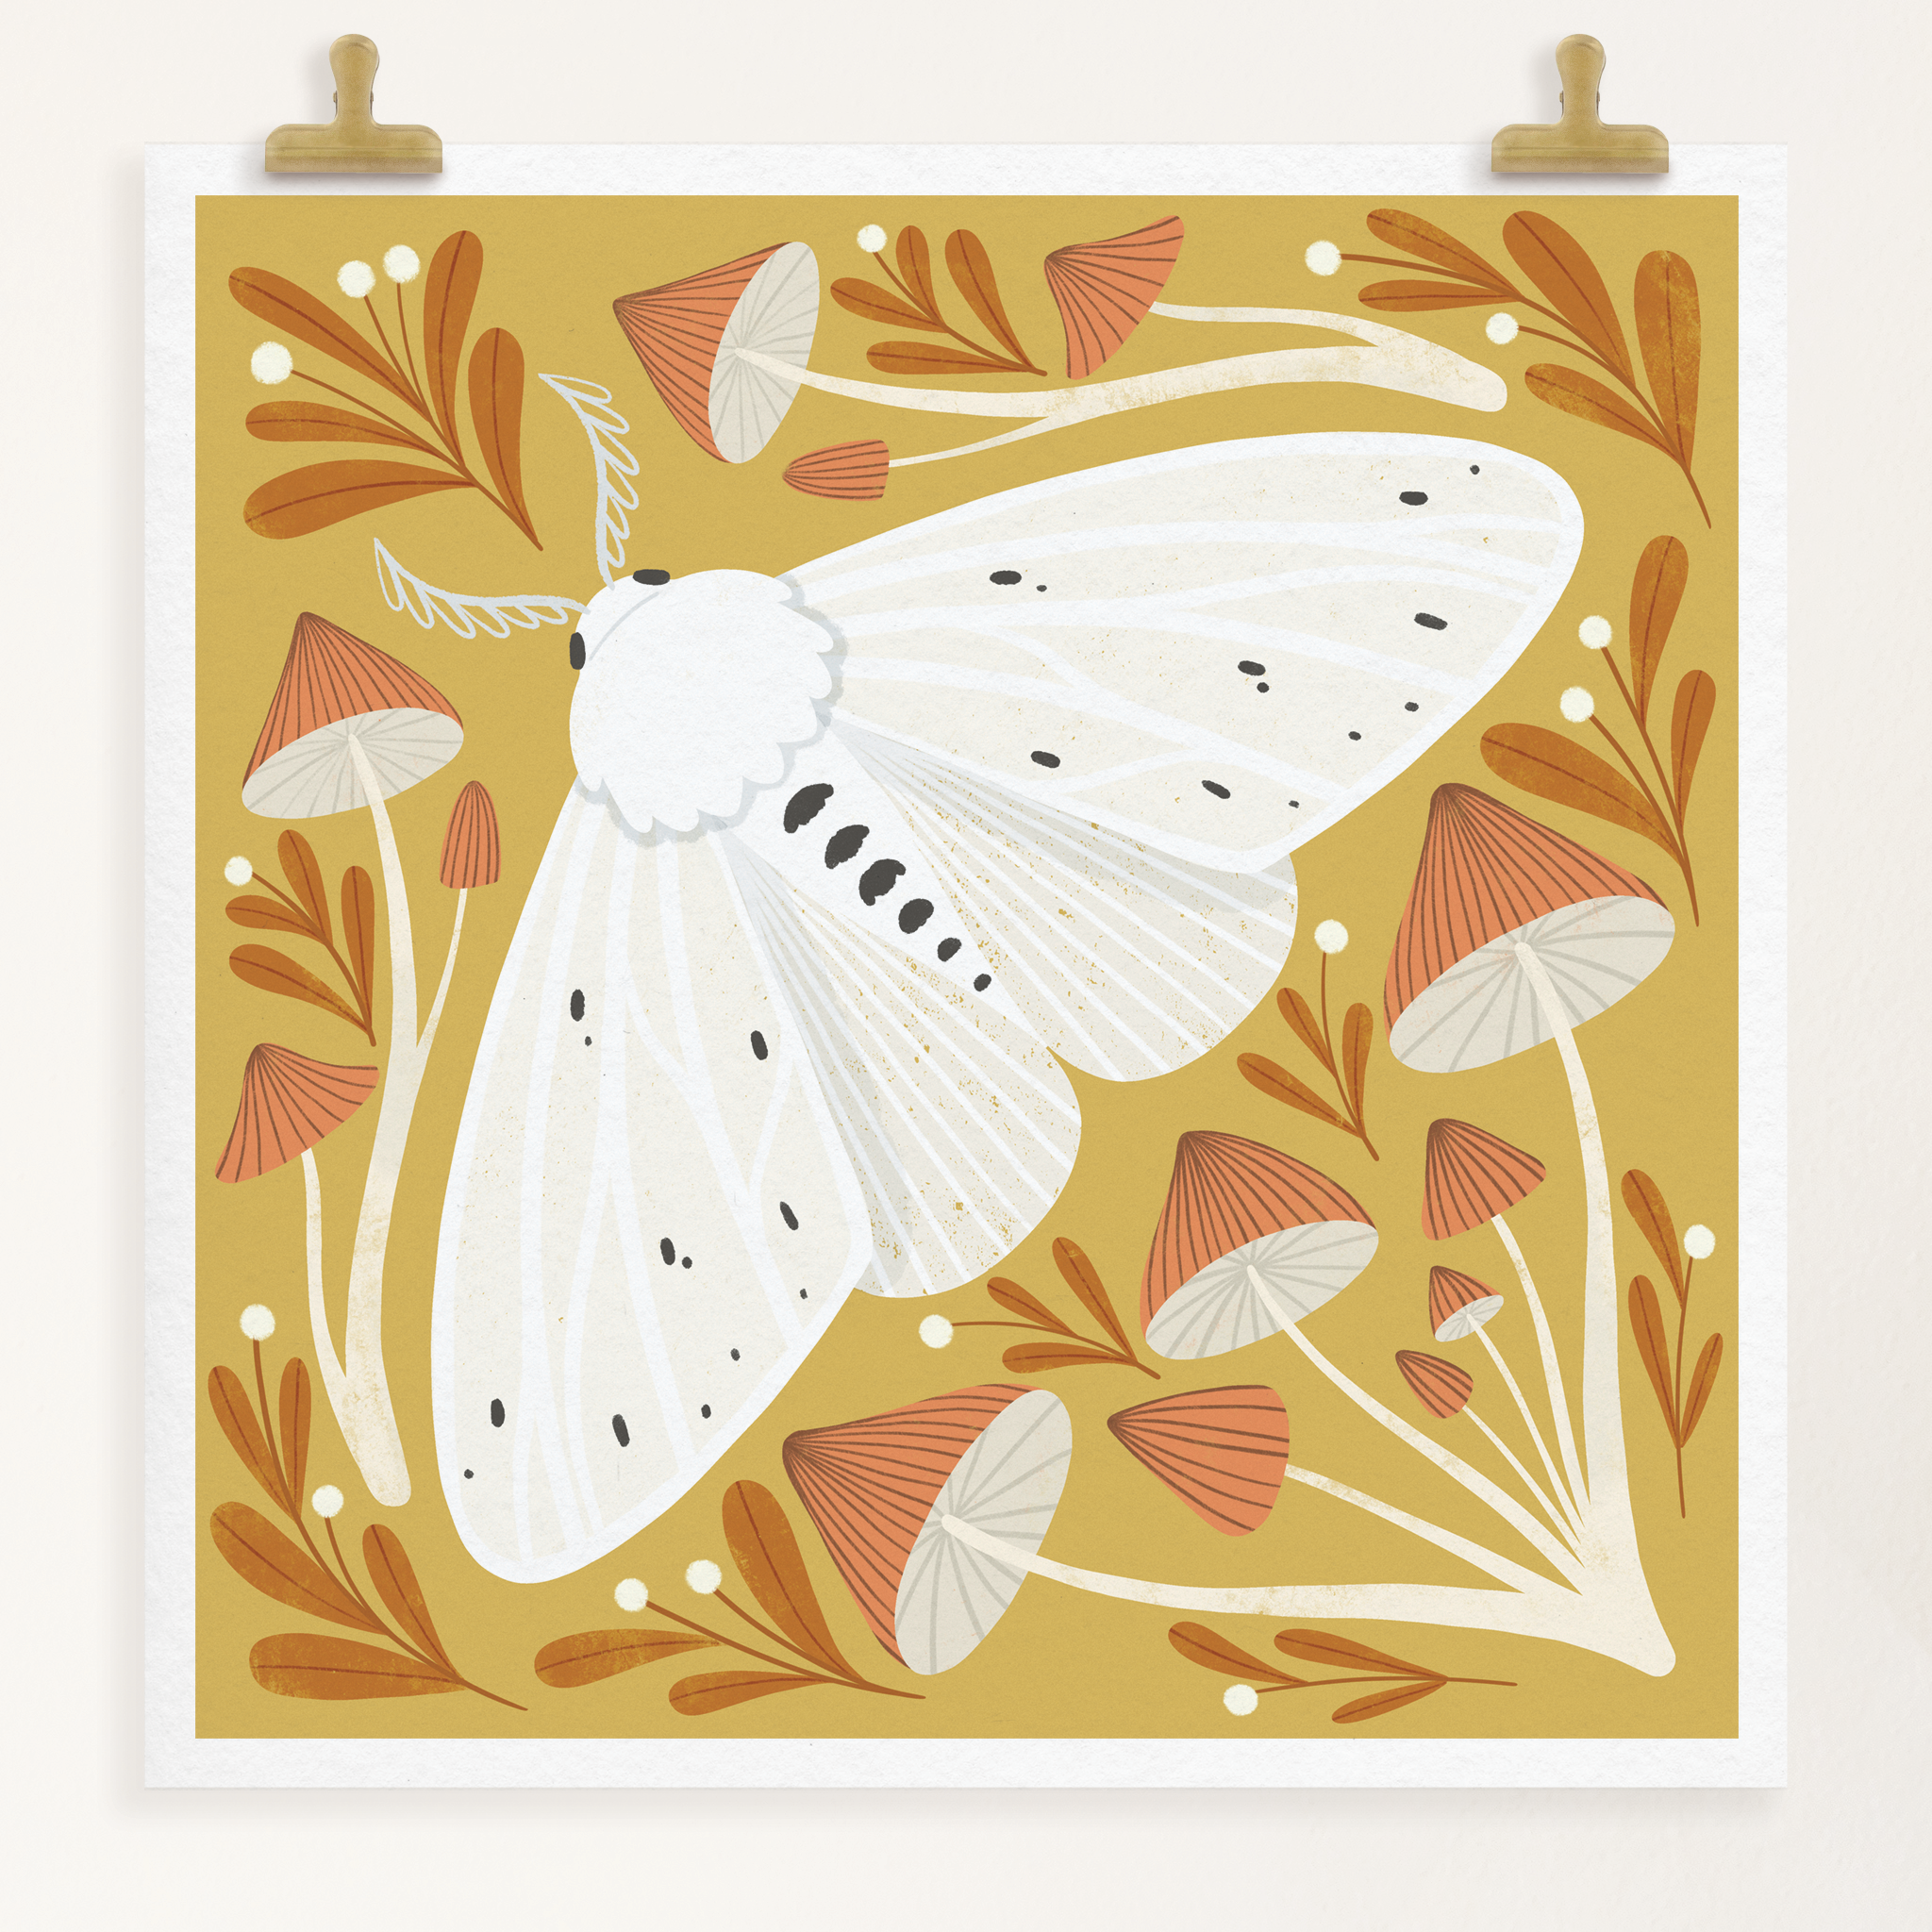 art print showing an agreeable tiger moth in black and white on a mustard yellow background, surrounded by red and white whimsical mushrooms. shown displayed hanging from two gold clips.